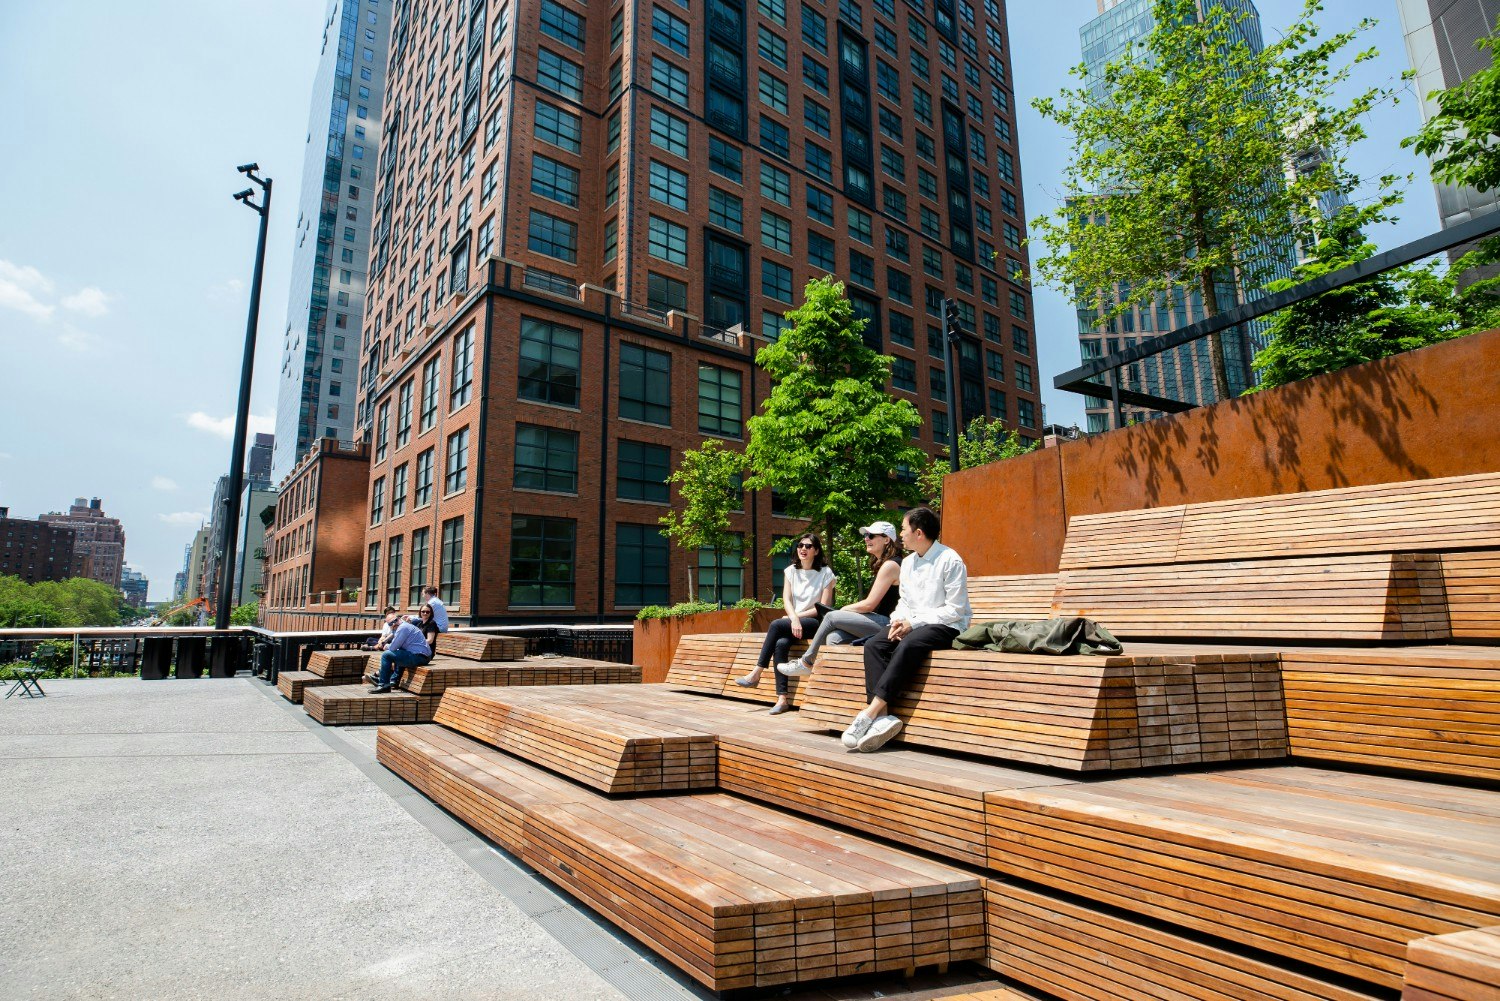 The New York High Line officially open